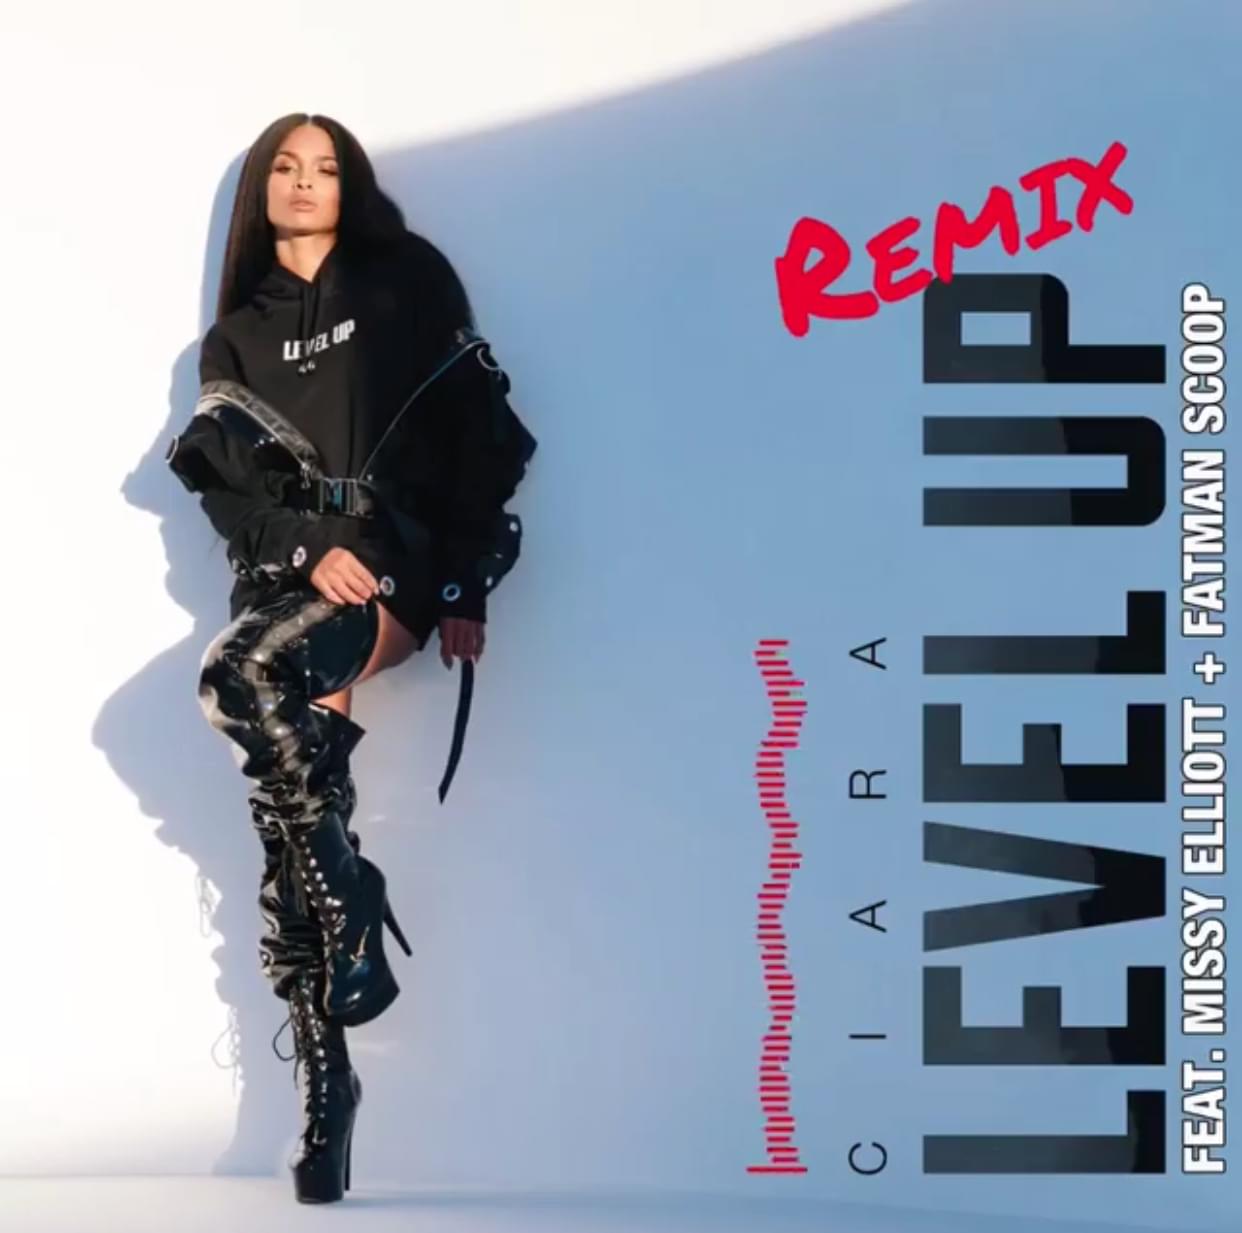 Ciara Drops “Level Up” Remix Featuring Missy Elliot And Fatman Scoop [LISTEN]